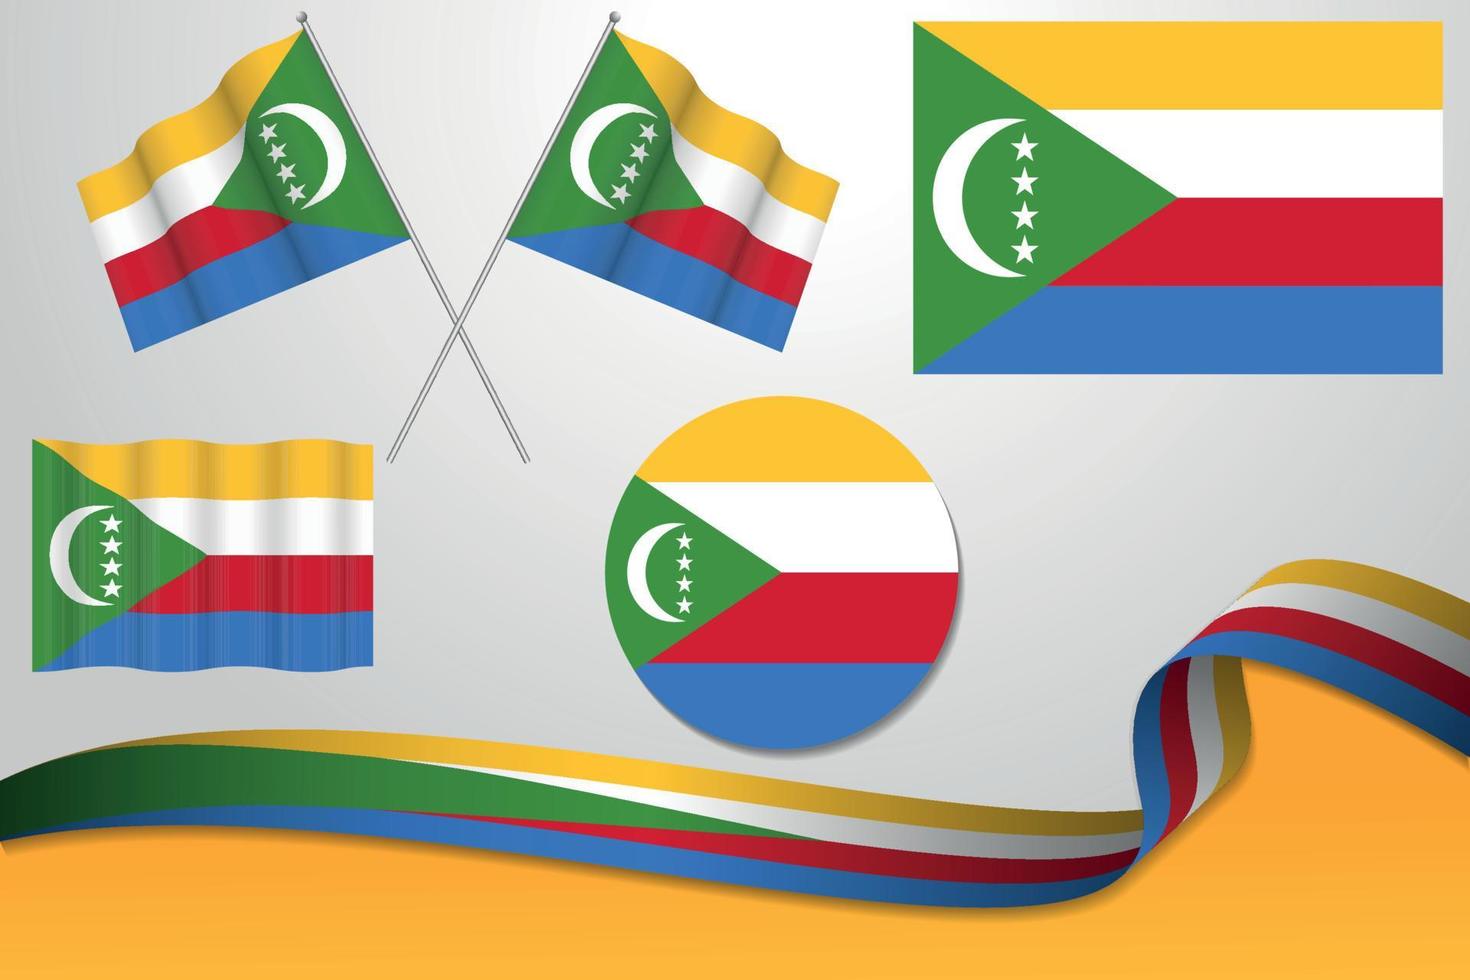 Set Of Comoros Flags In Different Designs, Icon, Flaying Flags With ribbon With Background. Free Vector